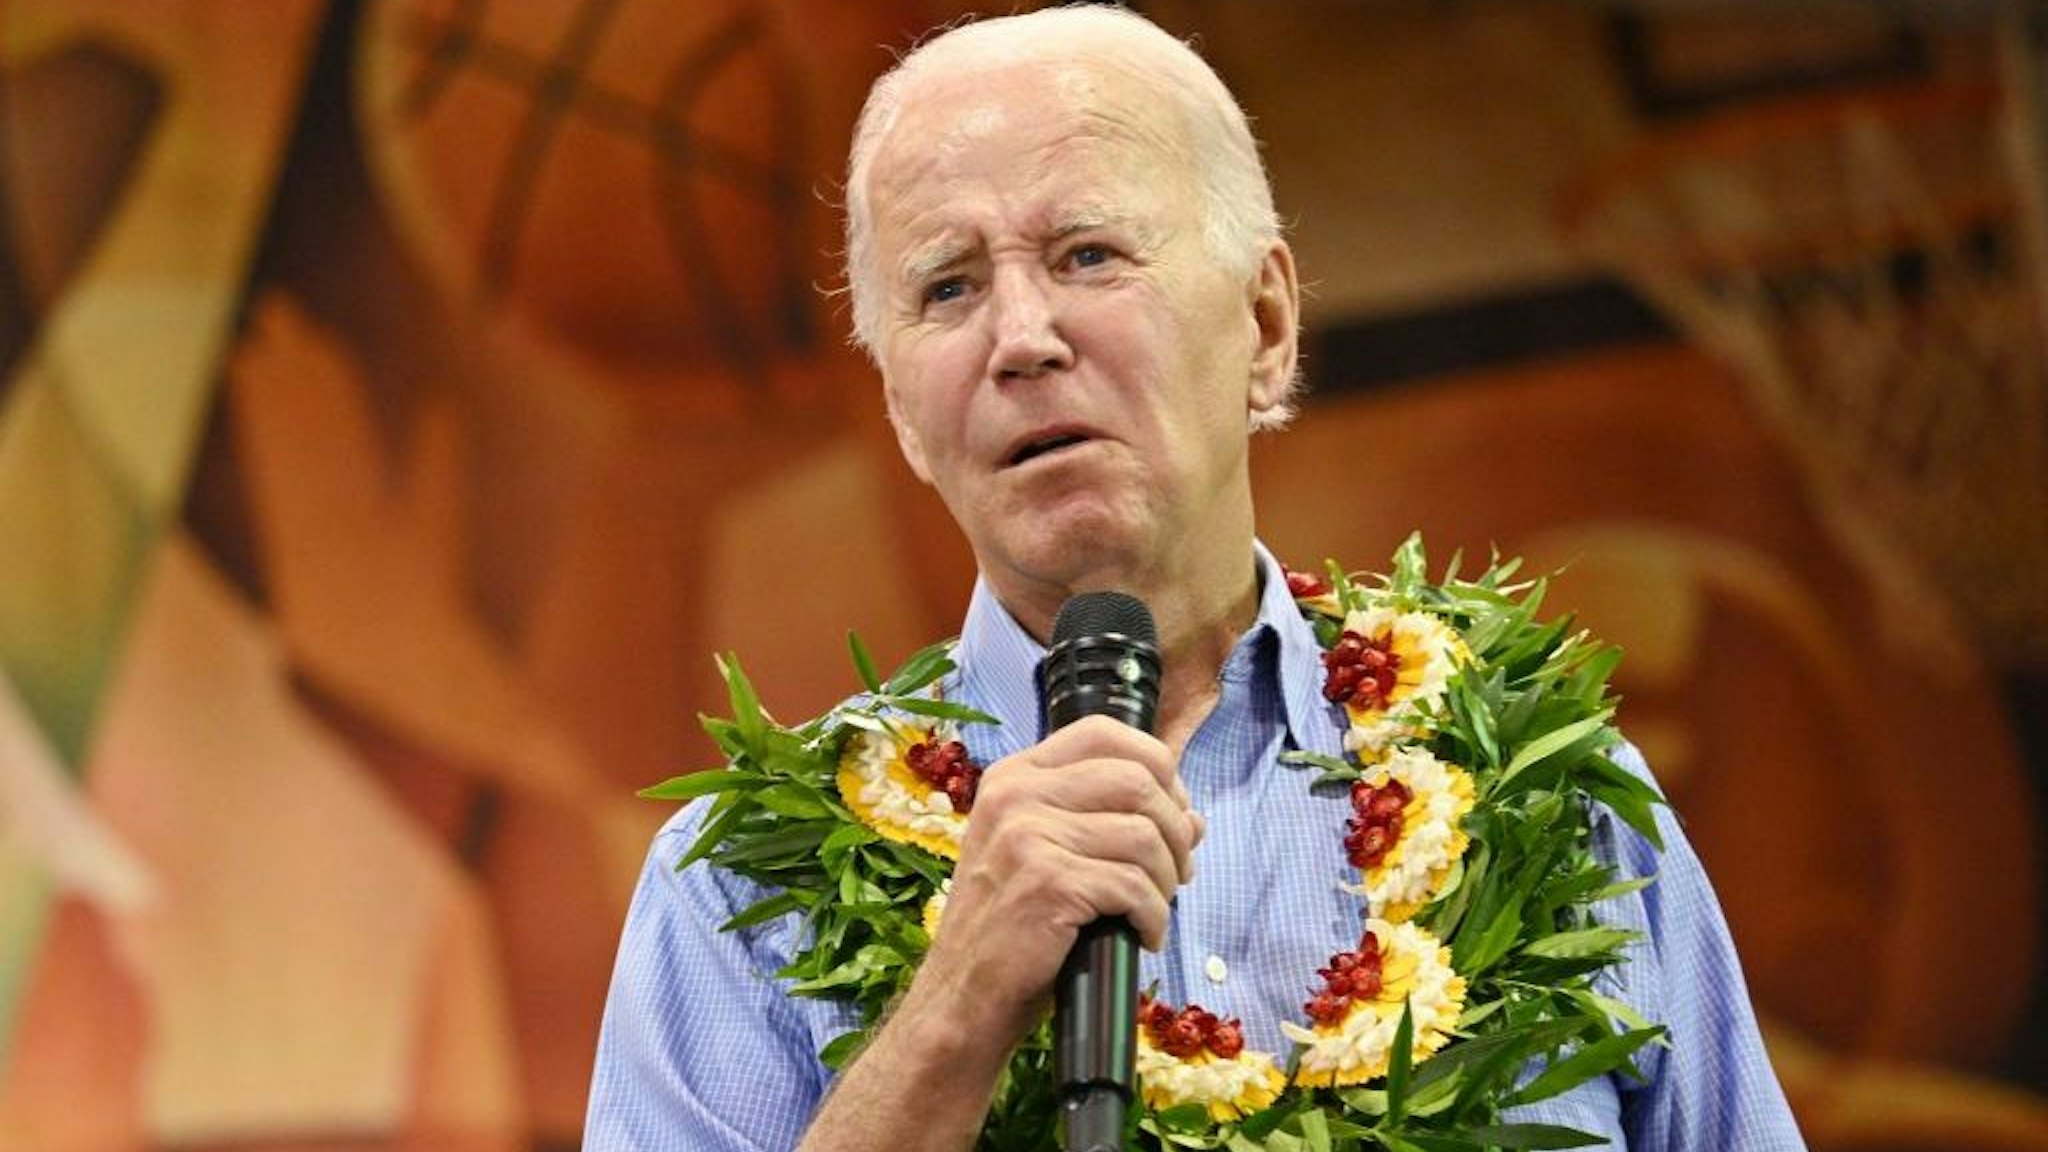 US President Joe Biden speaks during a community engagement event at the Lahaina Civic Center in Lahaina, Hawaii on August 21, 2023. (Photo by Mandel NGAN / AFP) (Photo by MANDEL NGAN/AFP via Getty Images)